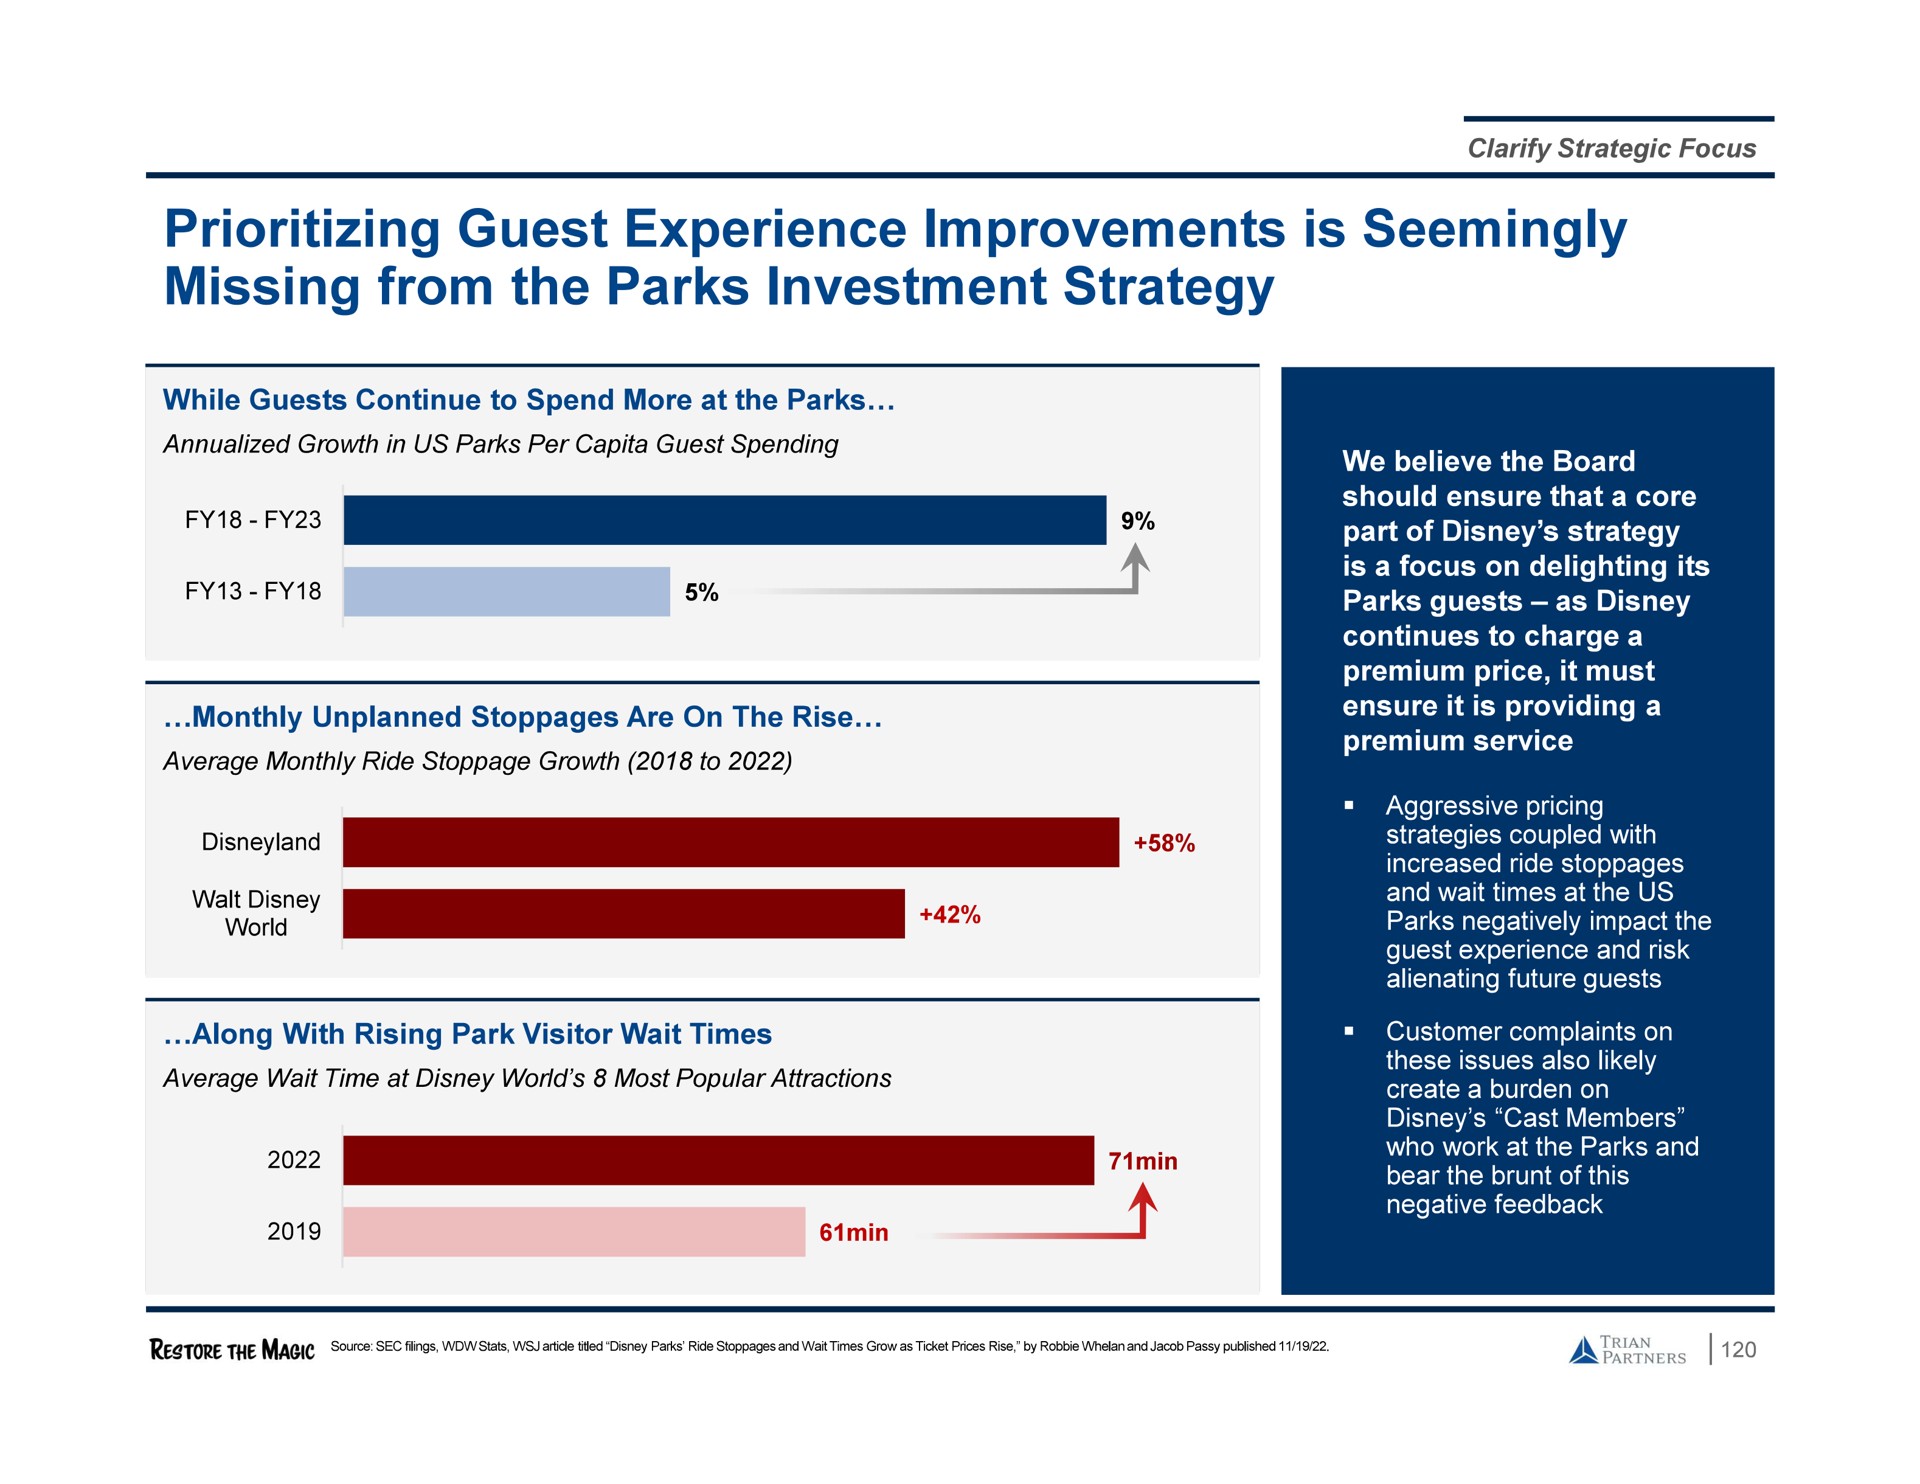 guest experience improvements is seemingly missing from the parks investment strategy | Trian Partners